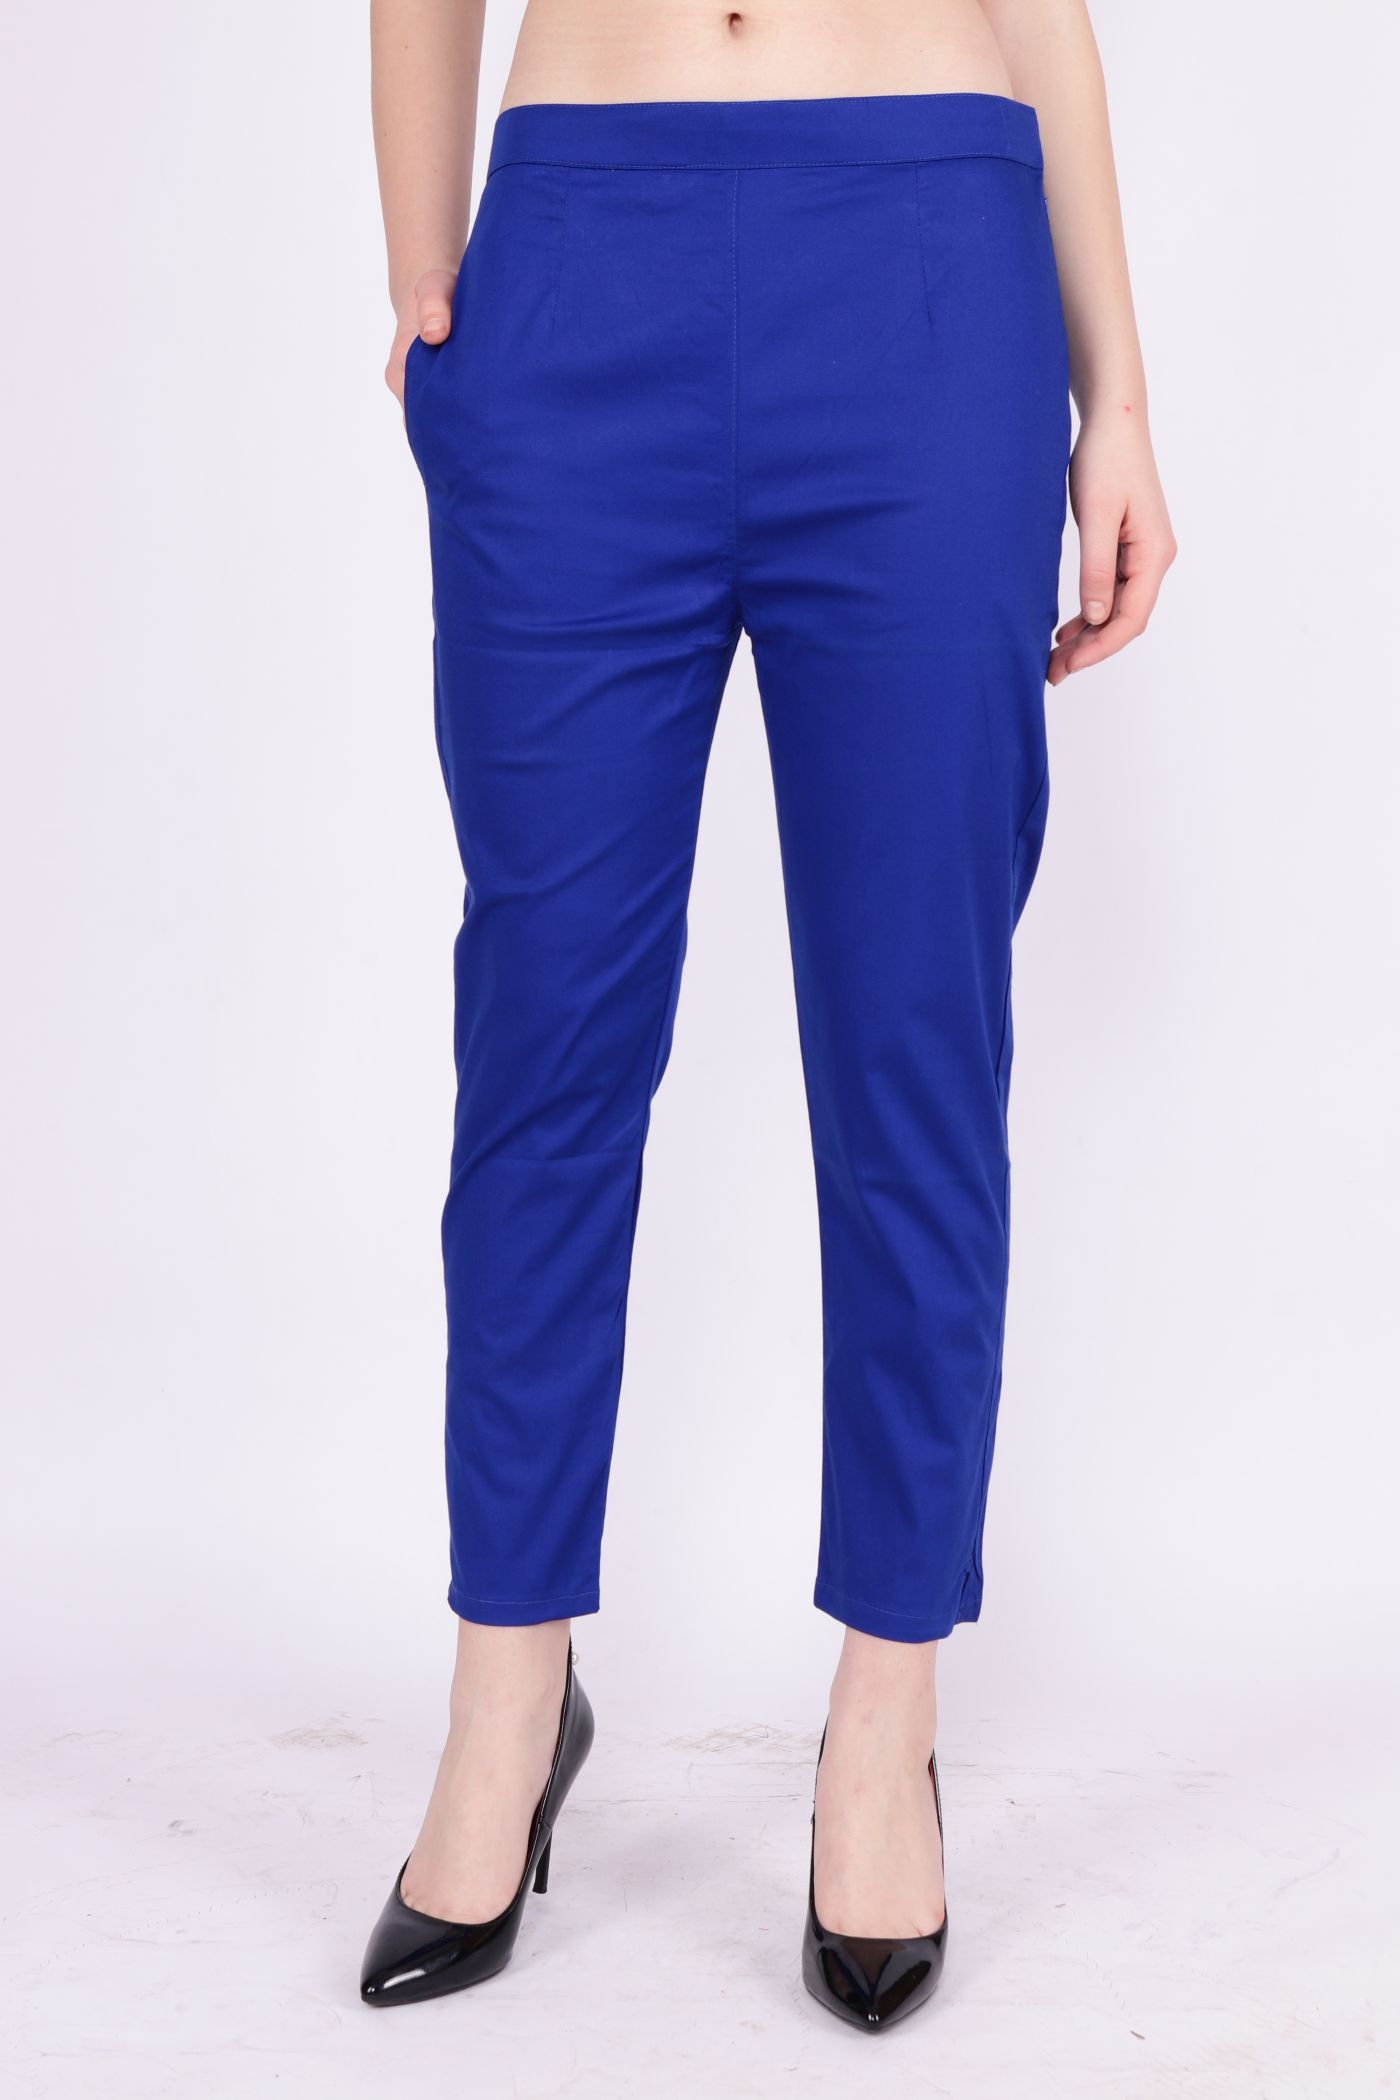 Pants Manufacturers - China Pants Factory & Suppliers